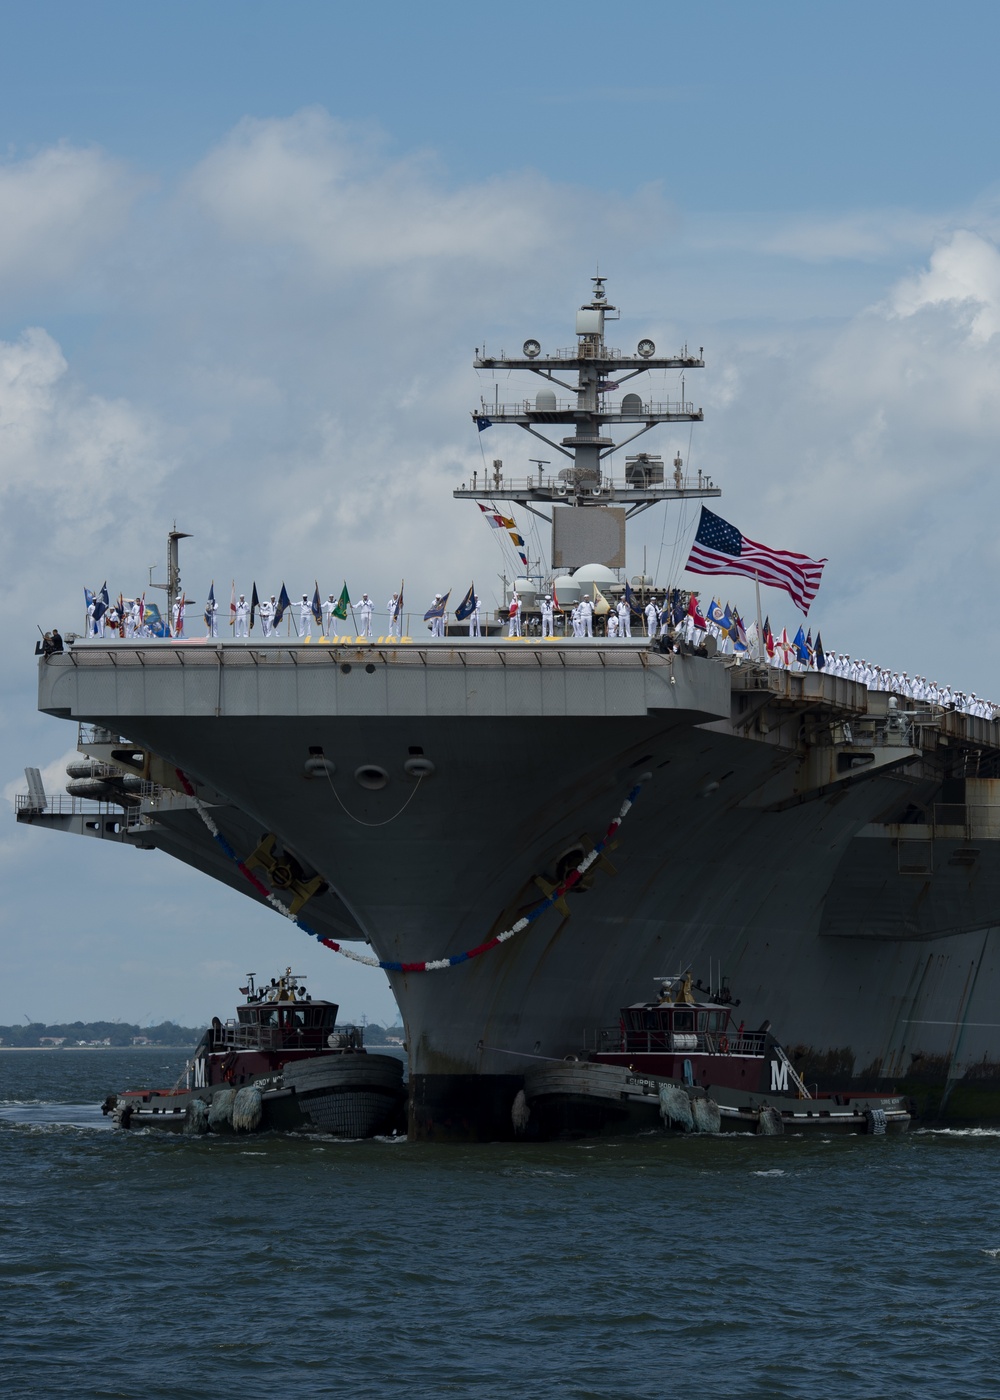 DVIDS - Images - USS Dwight D. Eisenhower Returns to Homeport After 6-Month Deployment to 5th